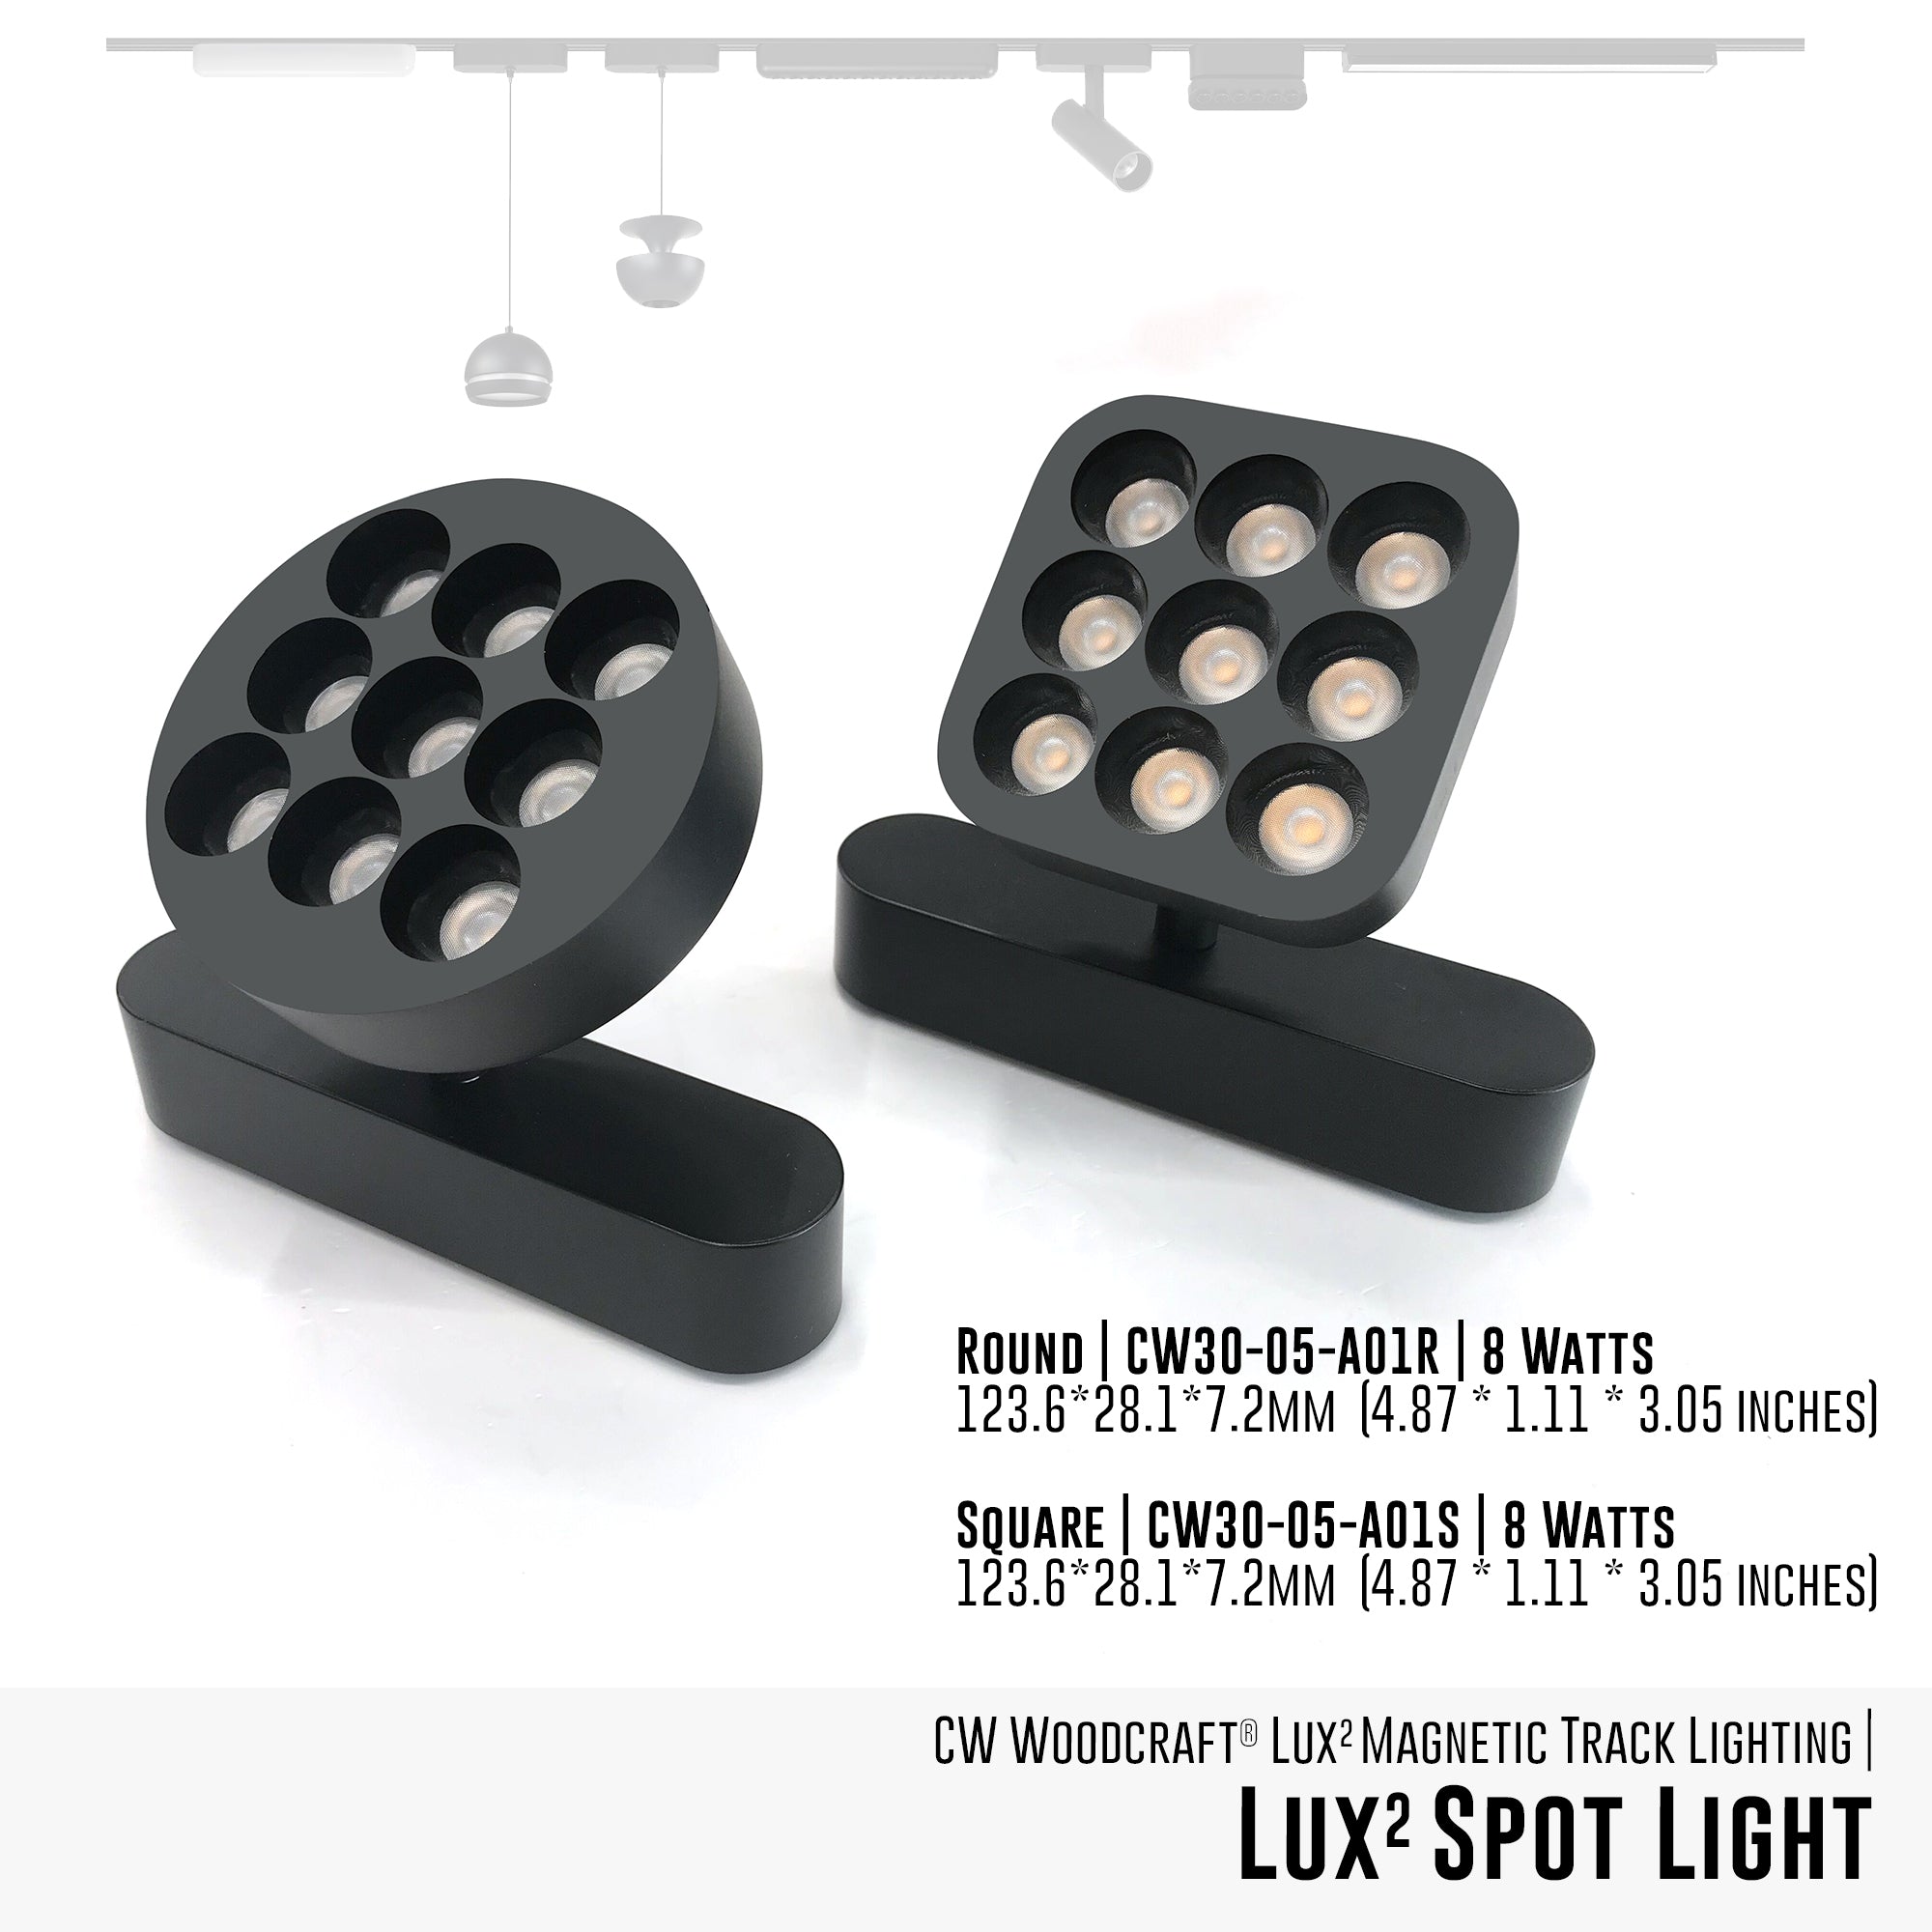 LUX 2 Magnetic Lighting System | Modules